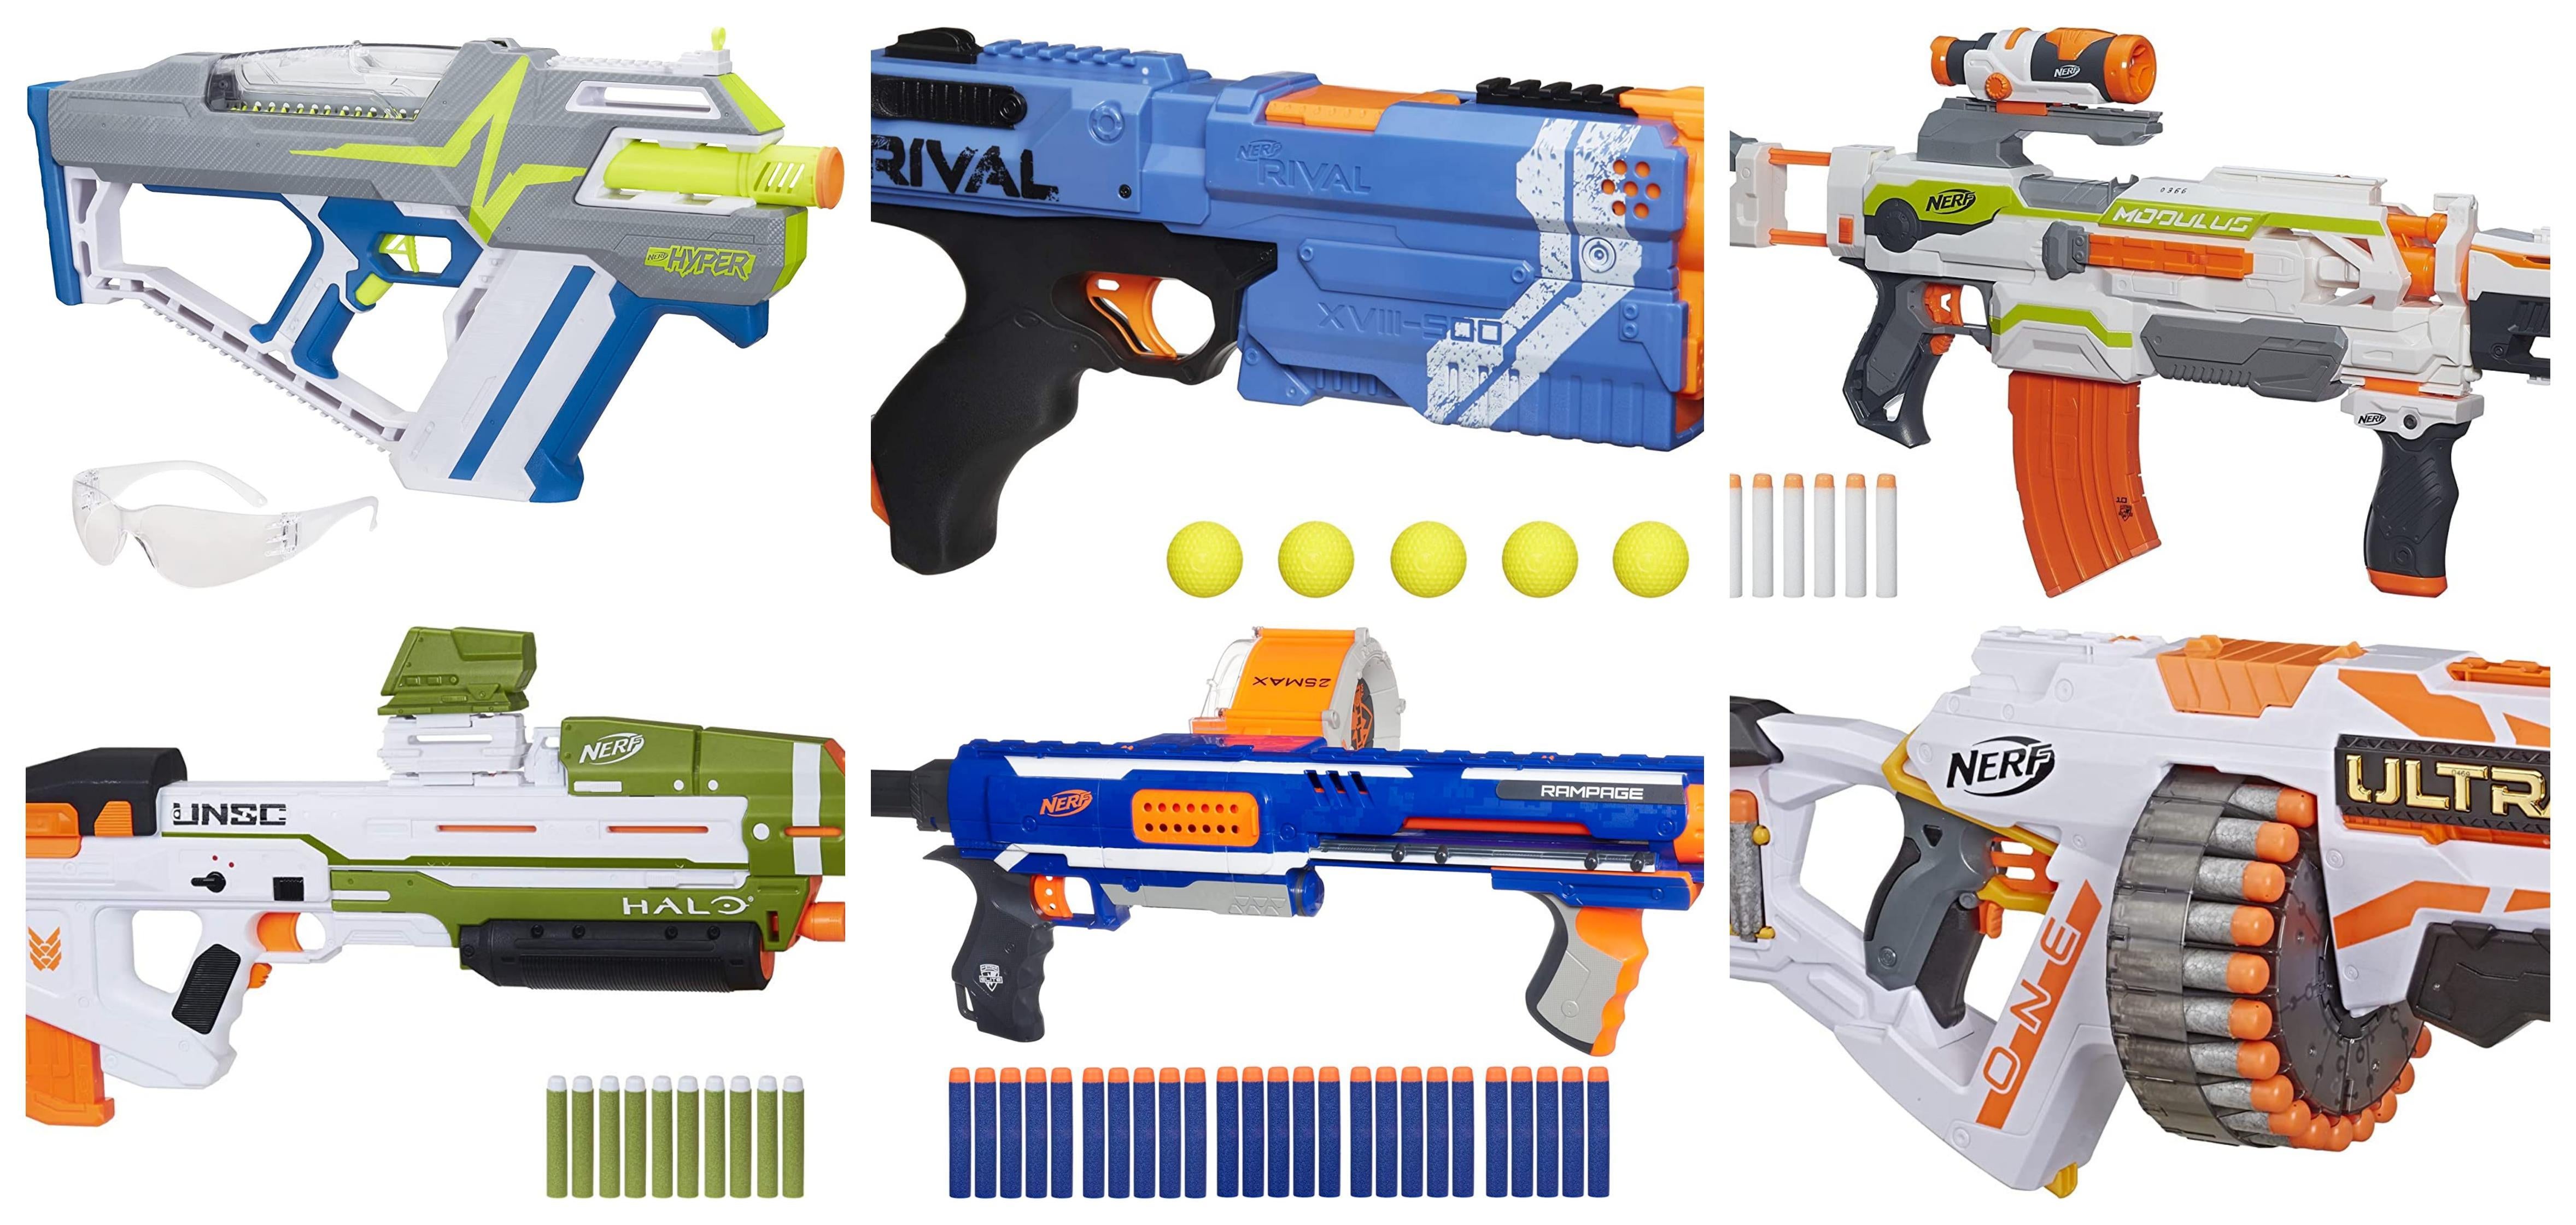 Massive NERF Hits For the Holidays